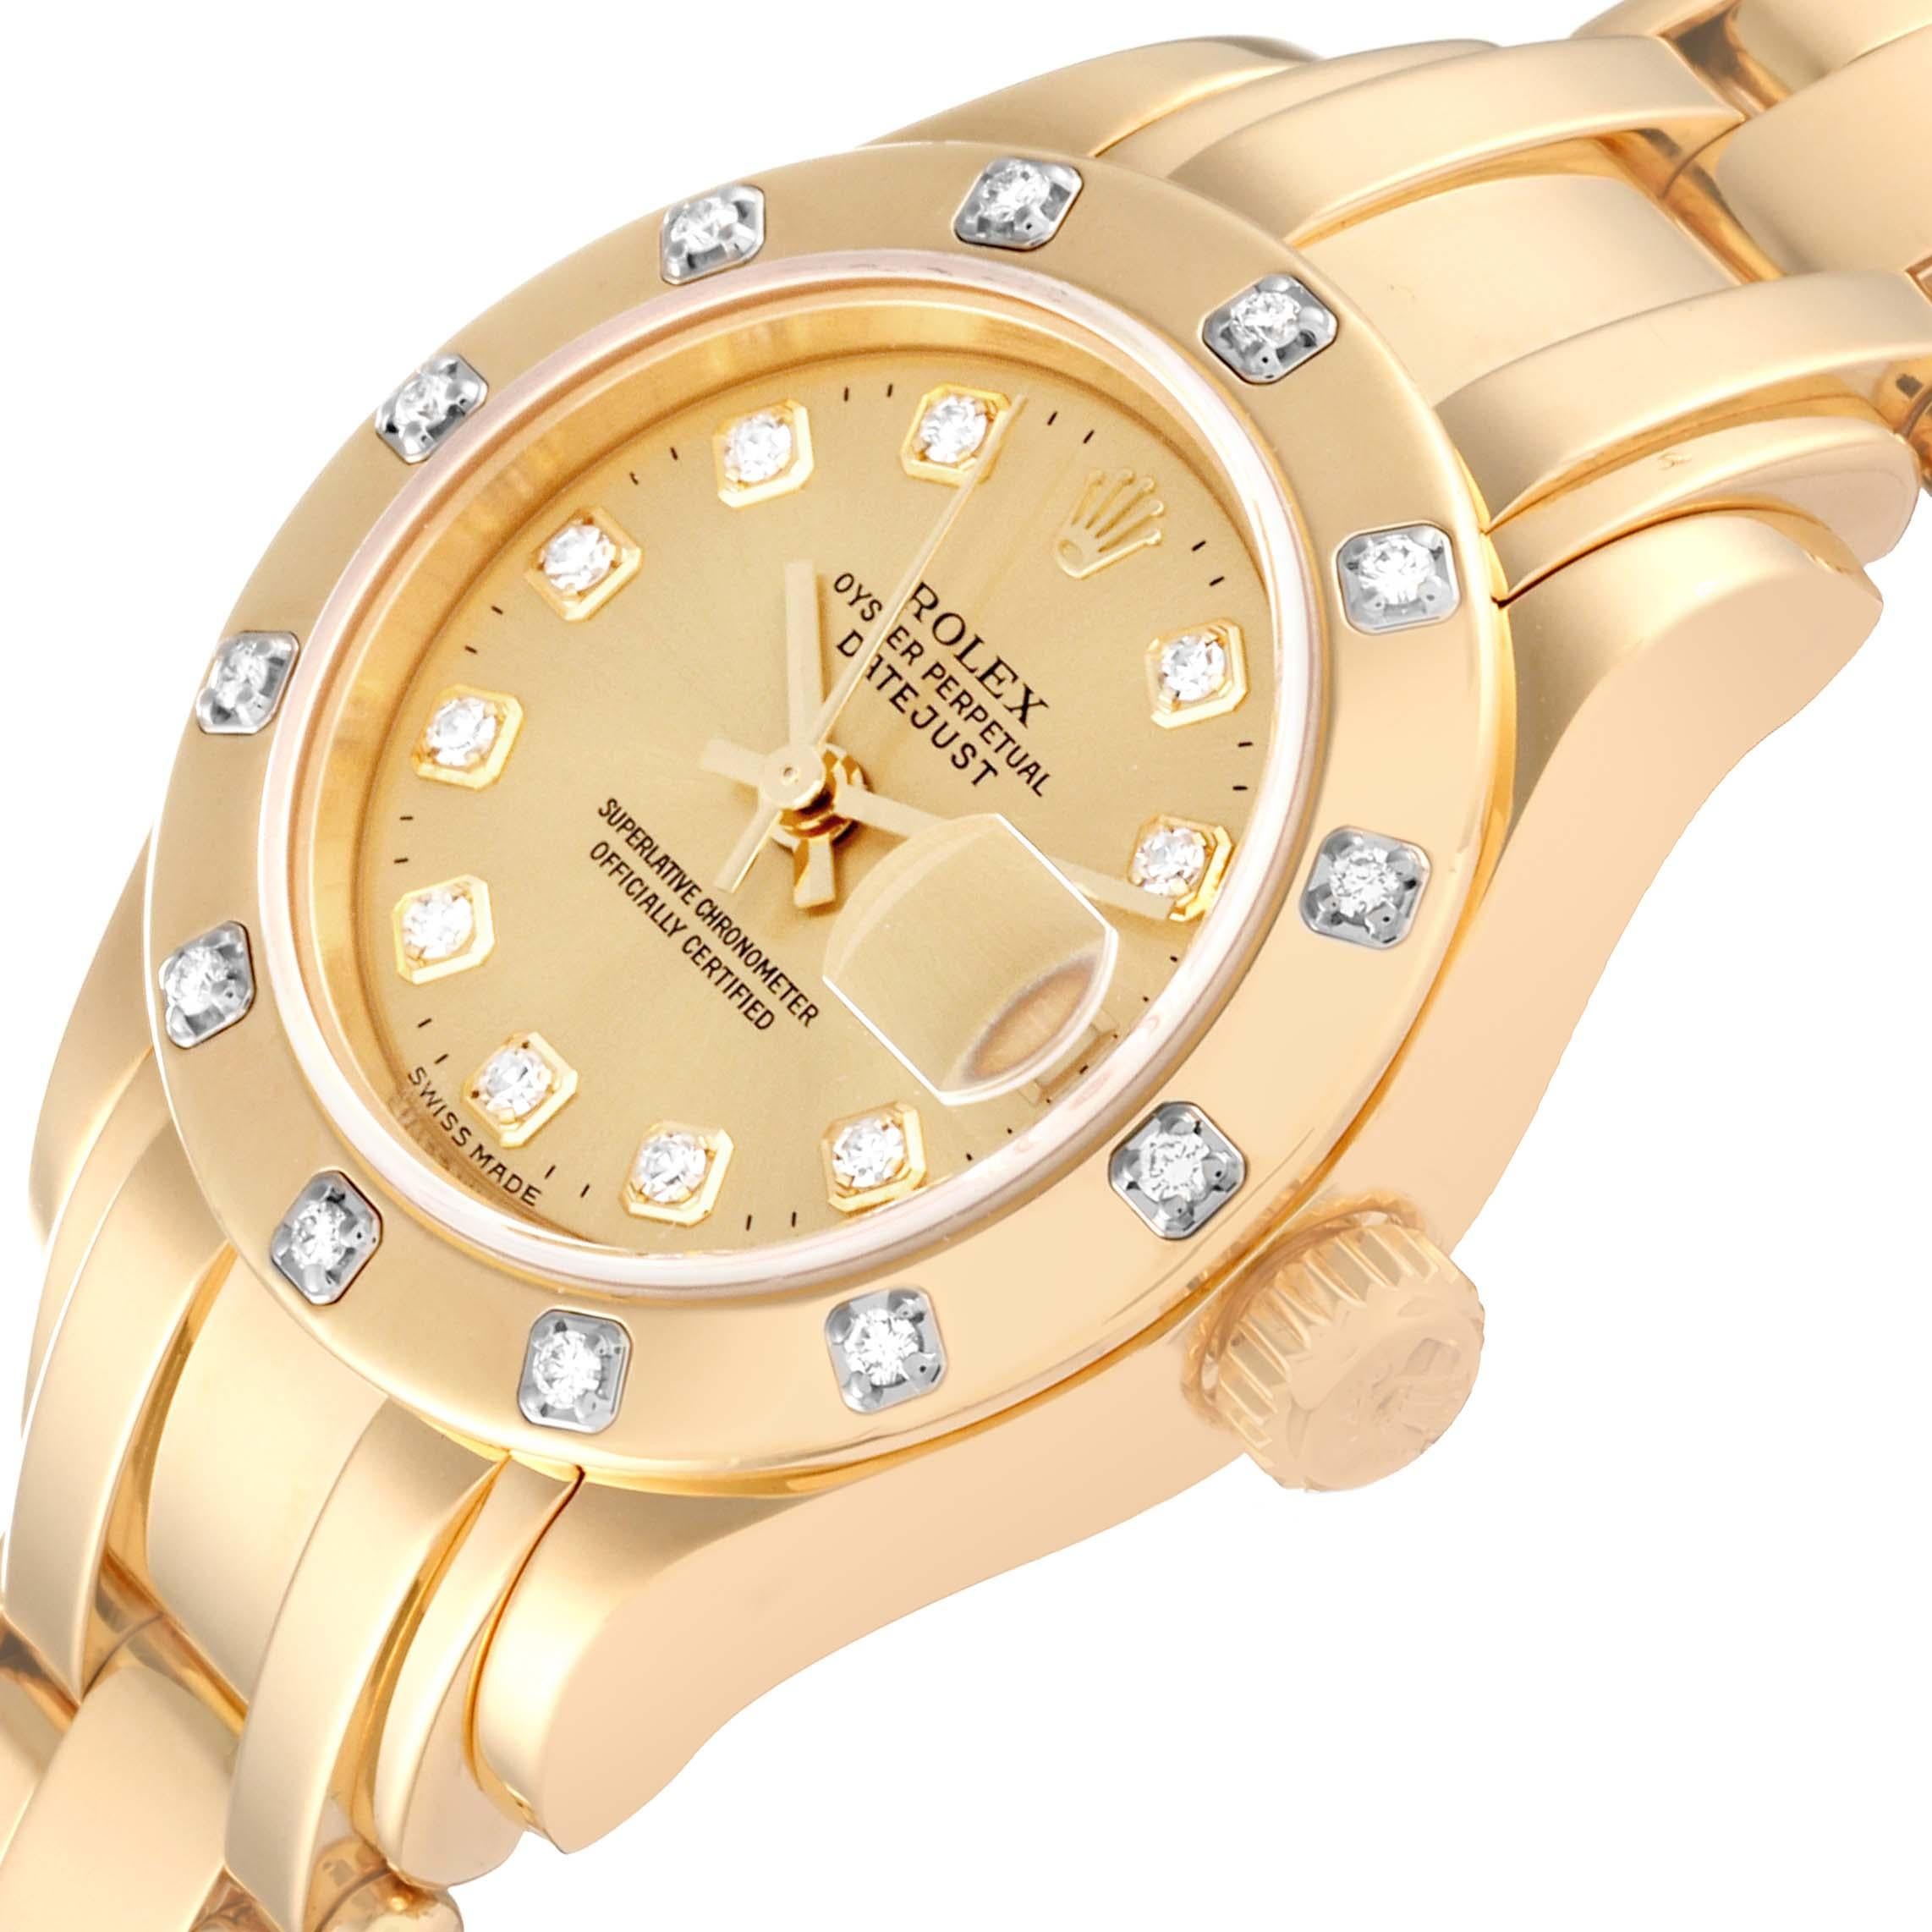 Rolex Pearlmaster 18K Yellow Gold Diamond Champagne Dial Ladies Watch 80318 For Sale 4